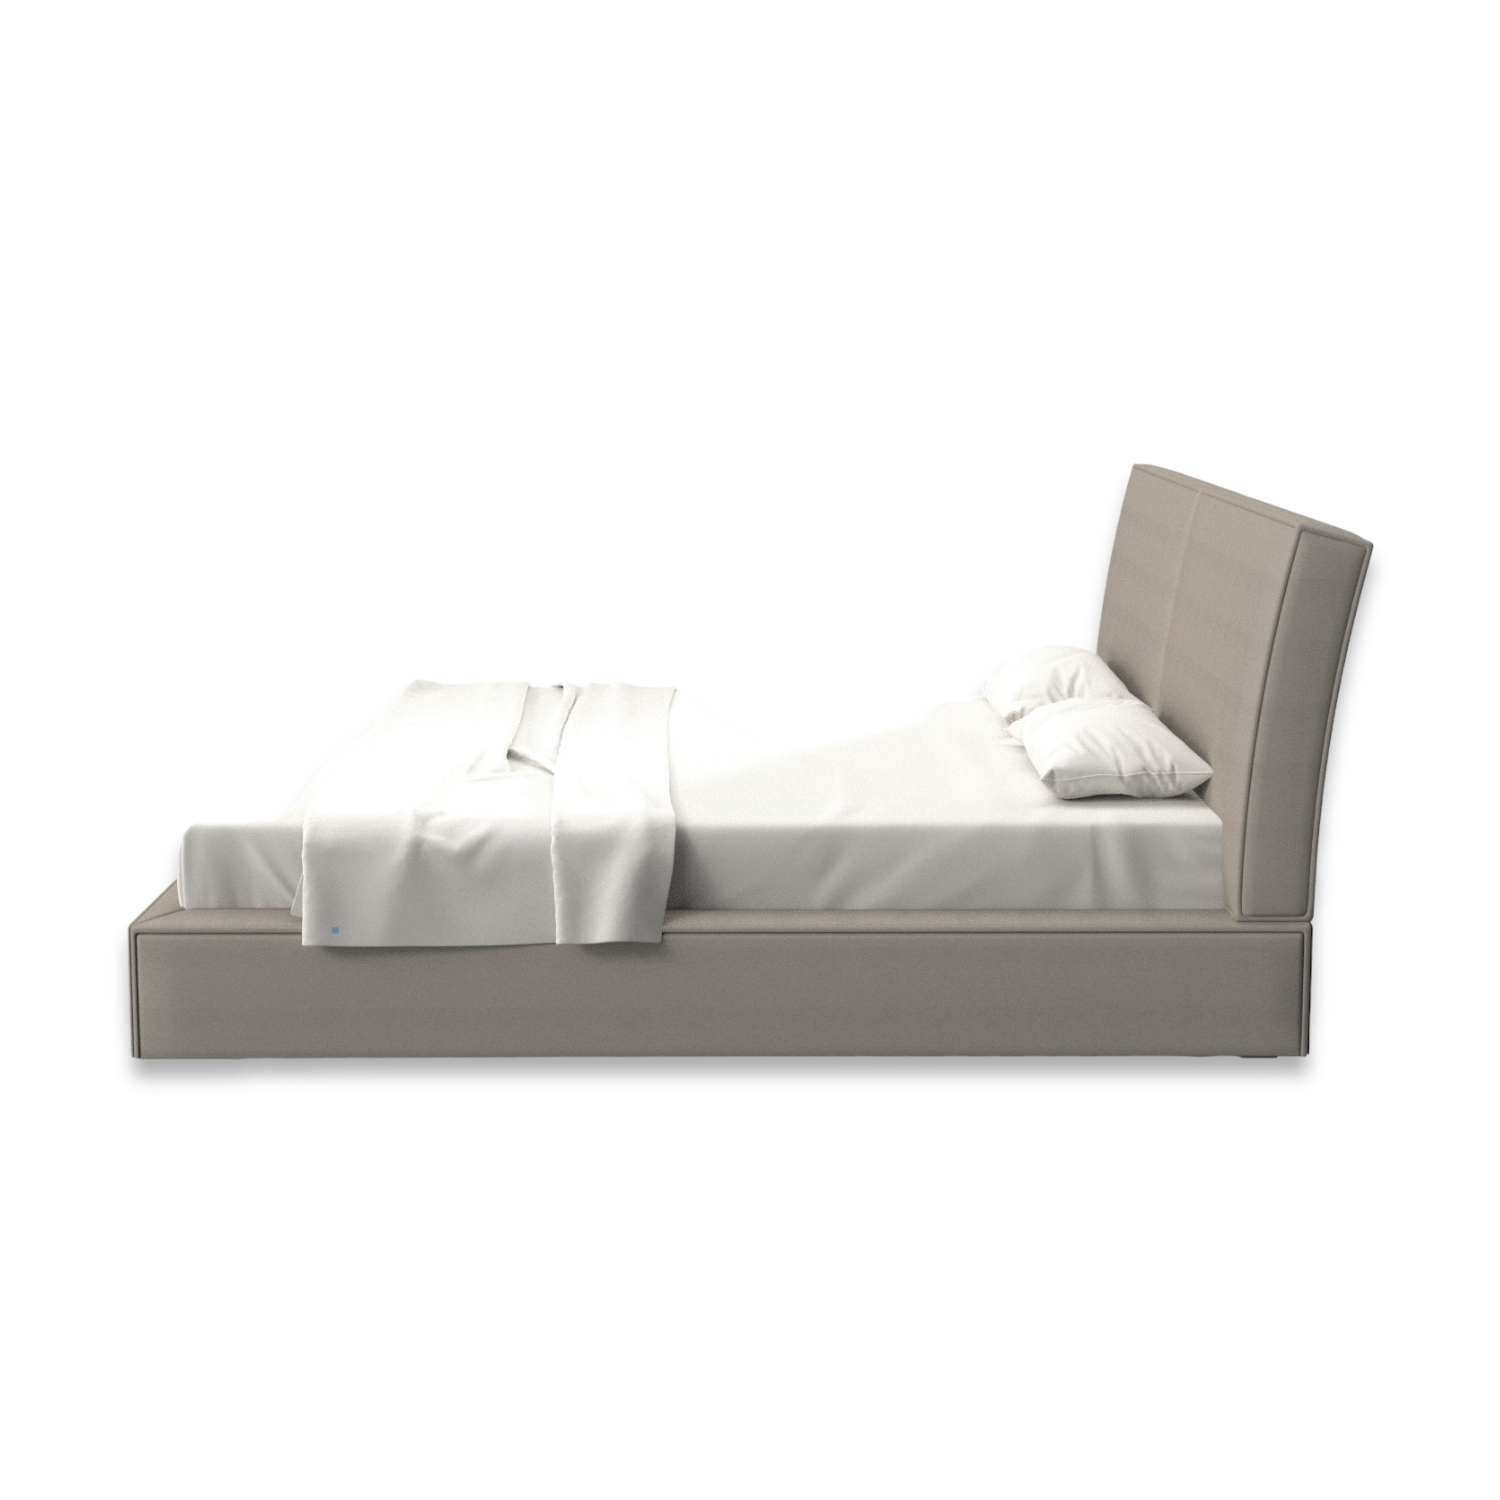 Harris Light Grey Taupe Bed